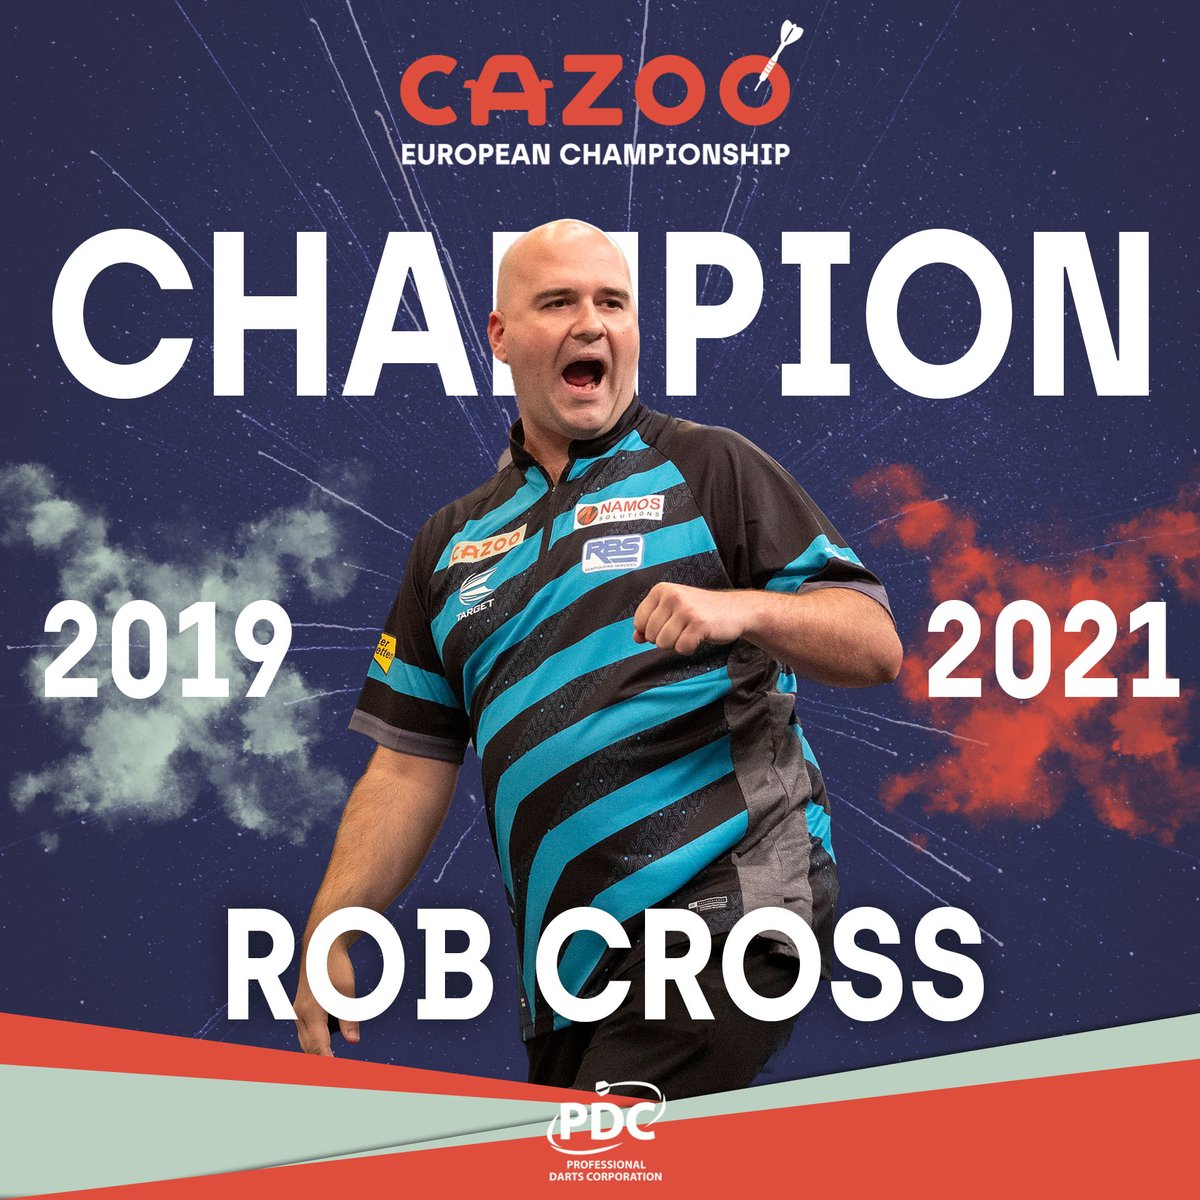 PDC Darts on Twitter: "𝗖𝗥𝗢𝗦𝗦 𝗗𝗢𝗘𝗦 𝗜𝗧 𝗔𝗚𝗔𝗜𝗡! second European title for Rob Cross as he backs up his in 2019 by doing it again in 2021. What a weekend